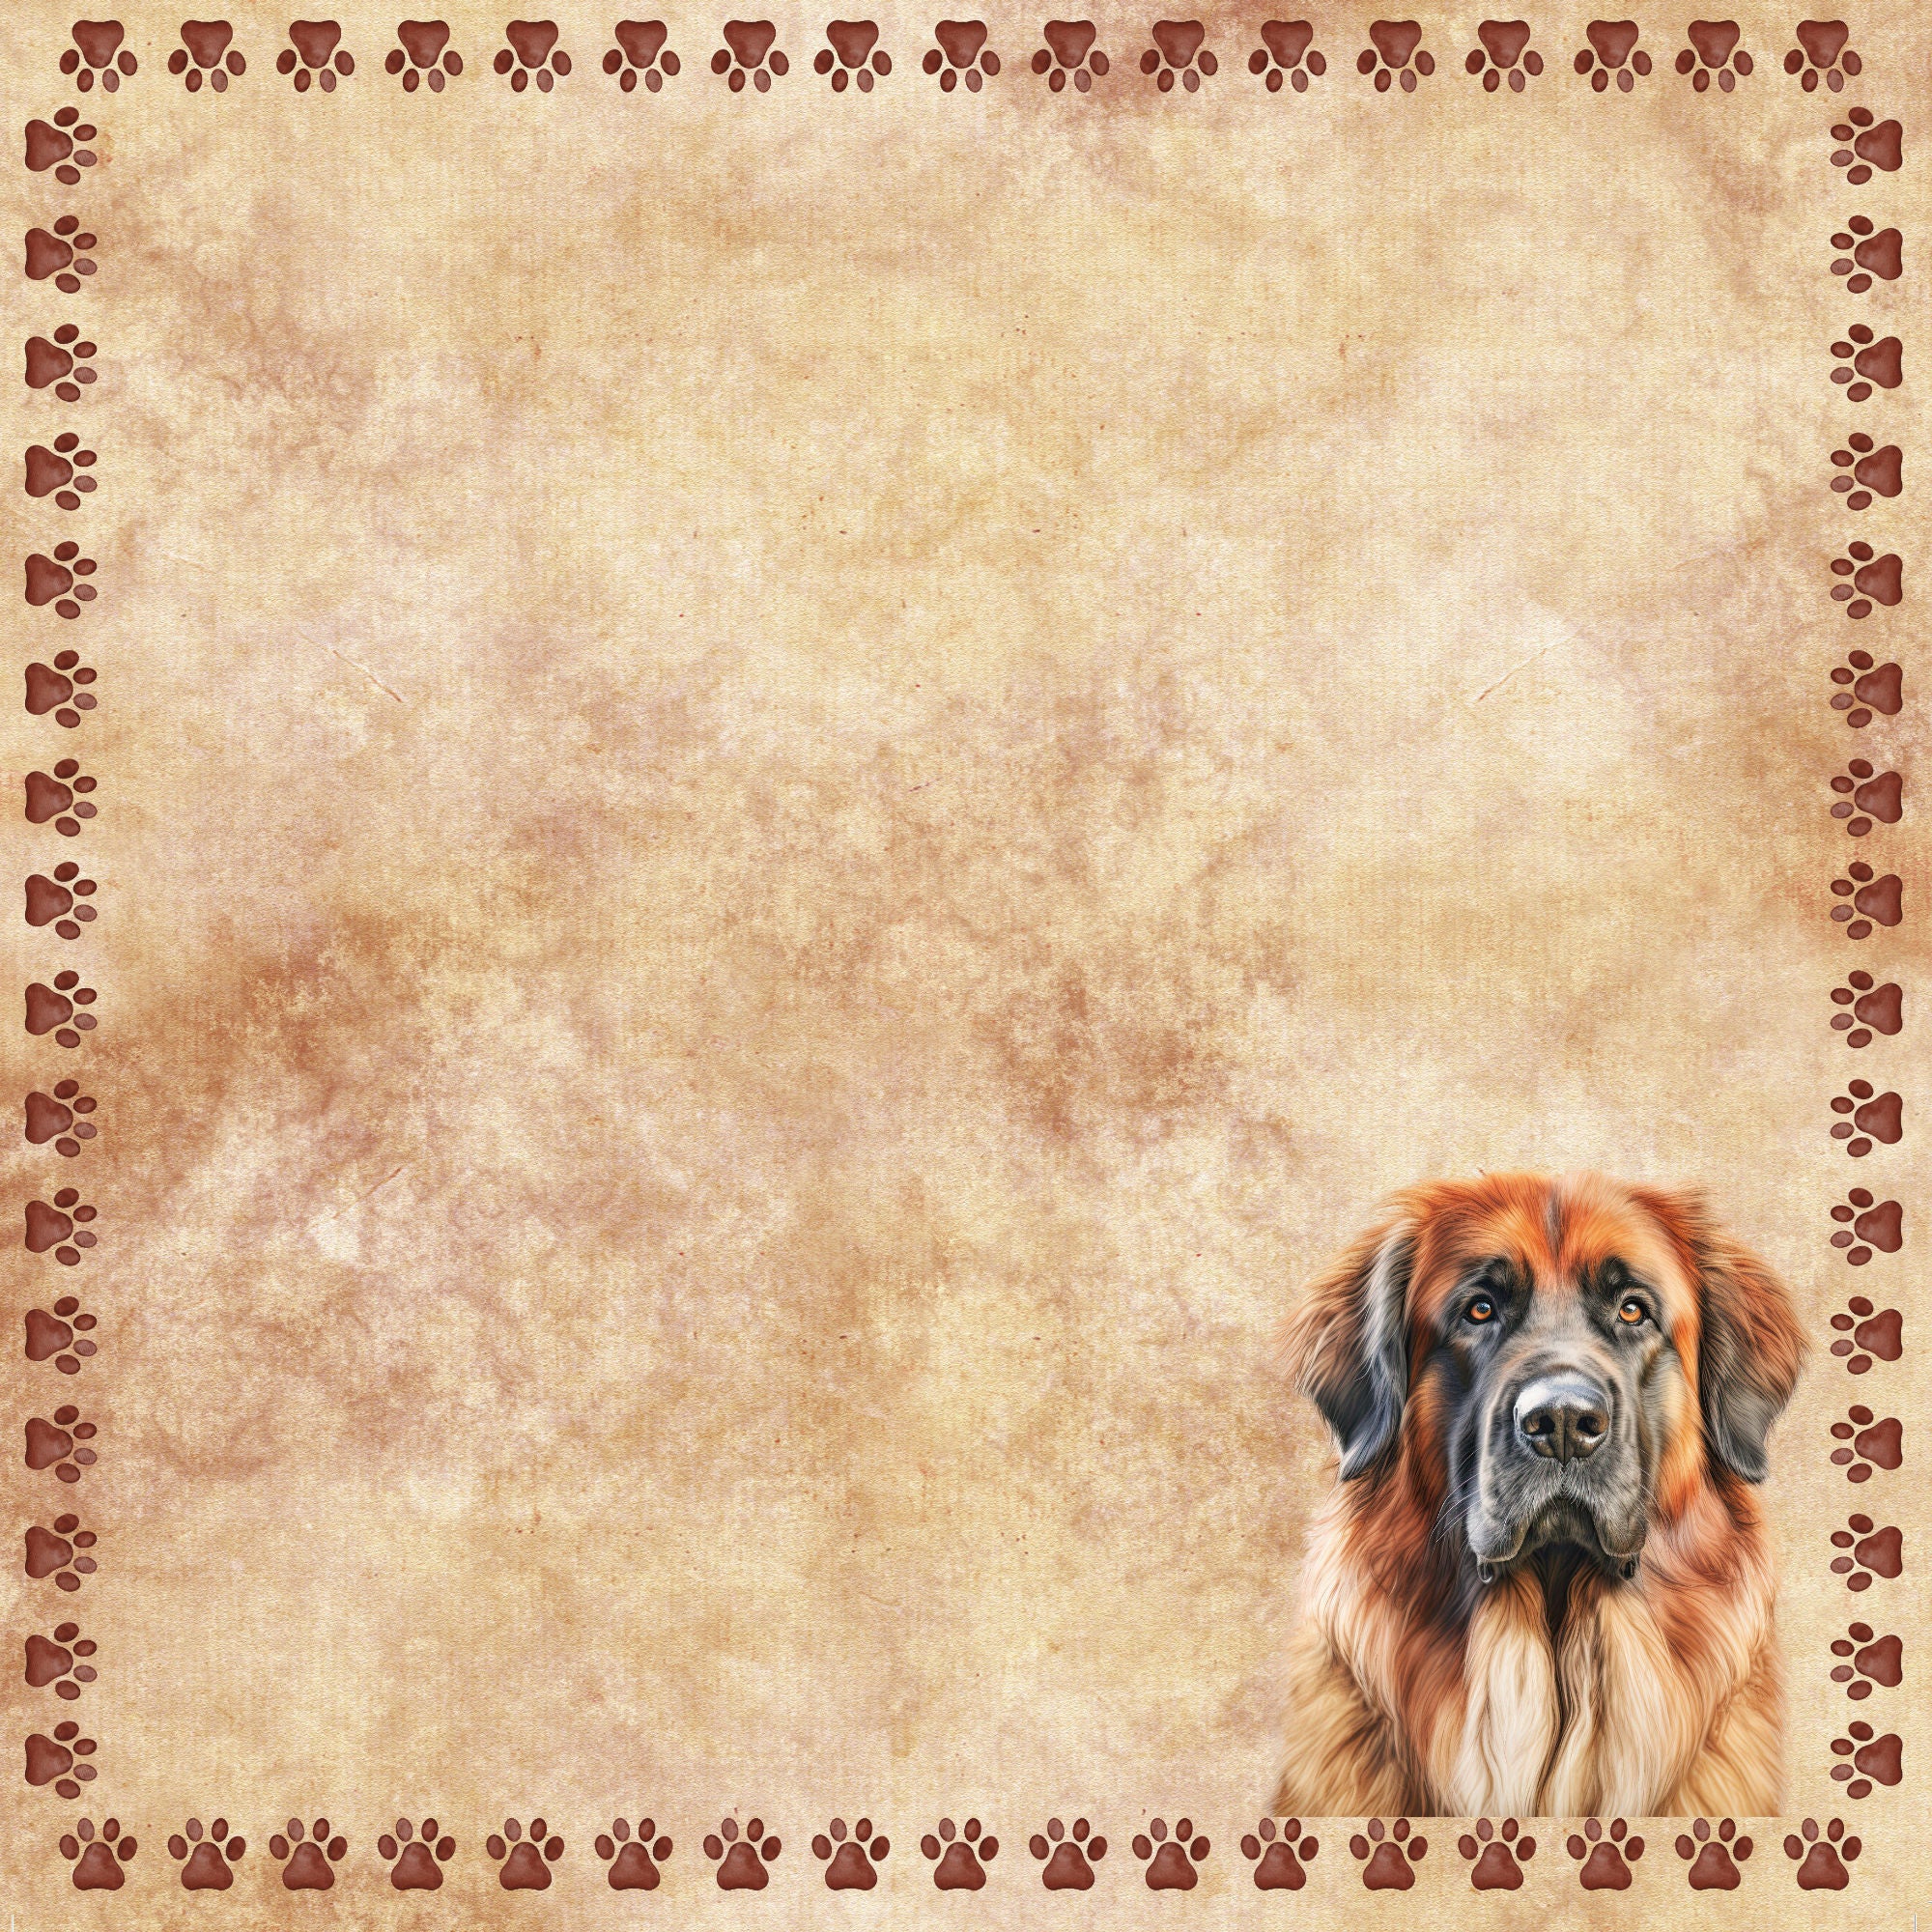 Dog Breeds Collection Leonberger 12 x 12 Double-Sided Scrapbook Paper by SSC Designs